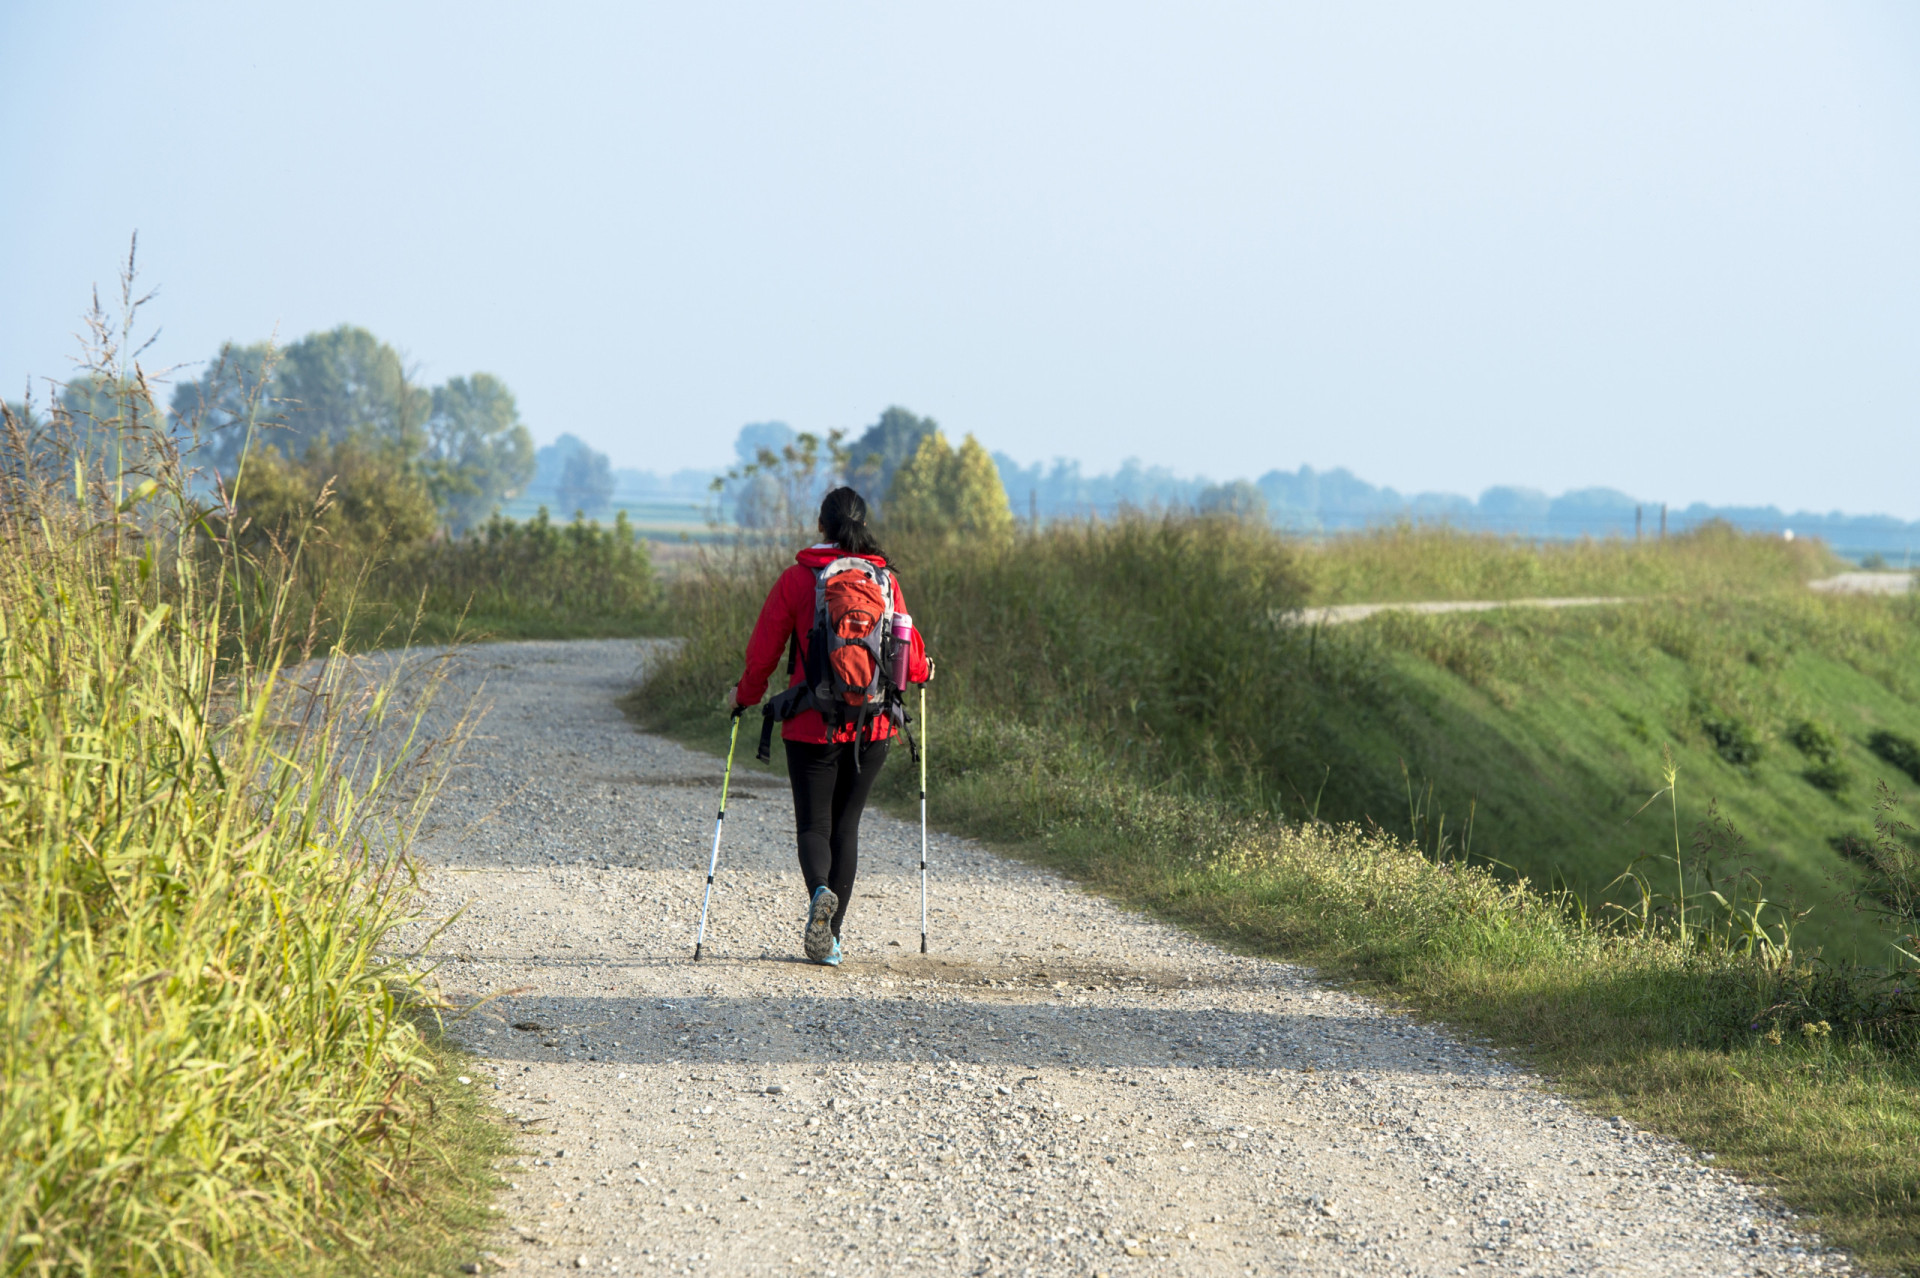 <p>One of the longest Catholic pilgrimages in Europe, Via Francigena starts in Canterbury, England. Pilgrims then pass through France, before wrapping up in Rome.</p><p>You may also like:<a href="https://www.starsinsider.com/n/484448?utm_source=msn.com&utm_medium=display&utm_campaign=referral_description&utm_content=524487en-us"> History's greatest archaeological discoveries</a></p>